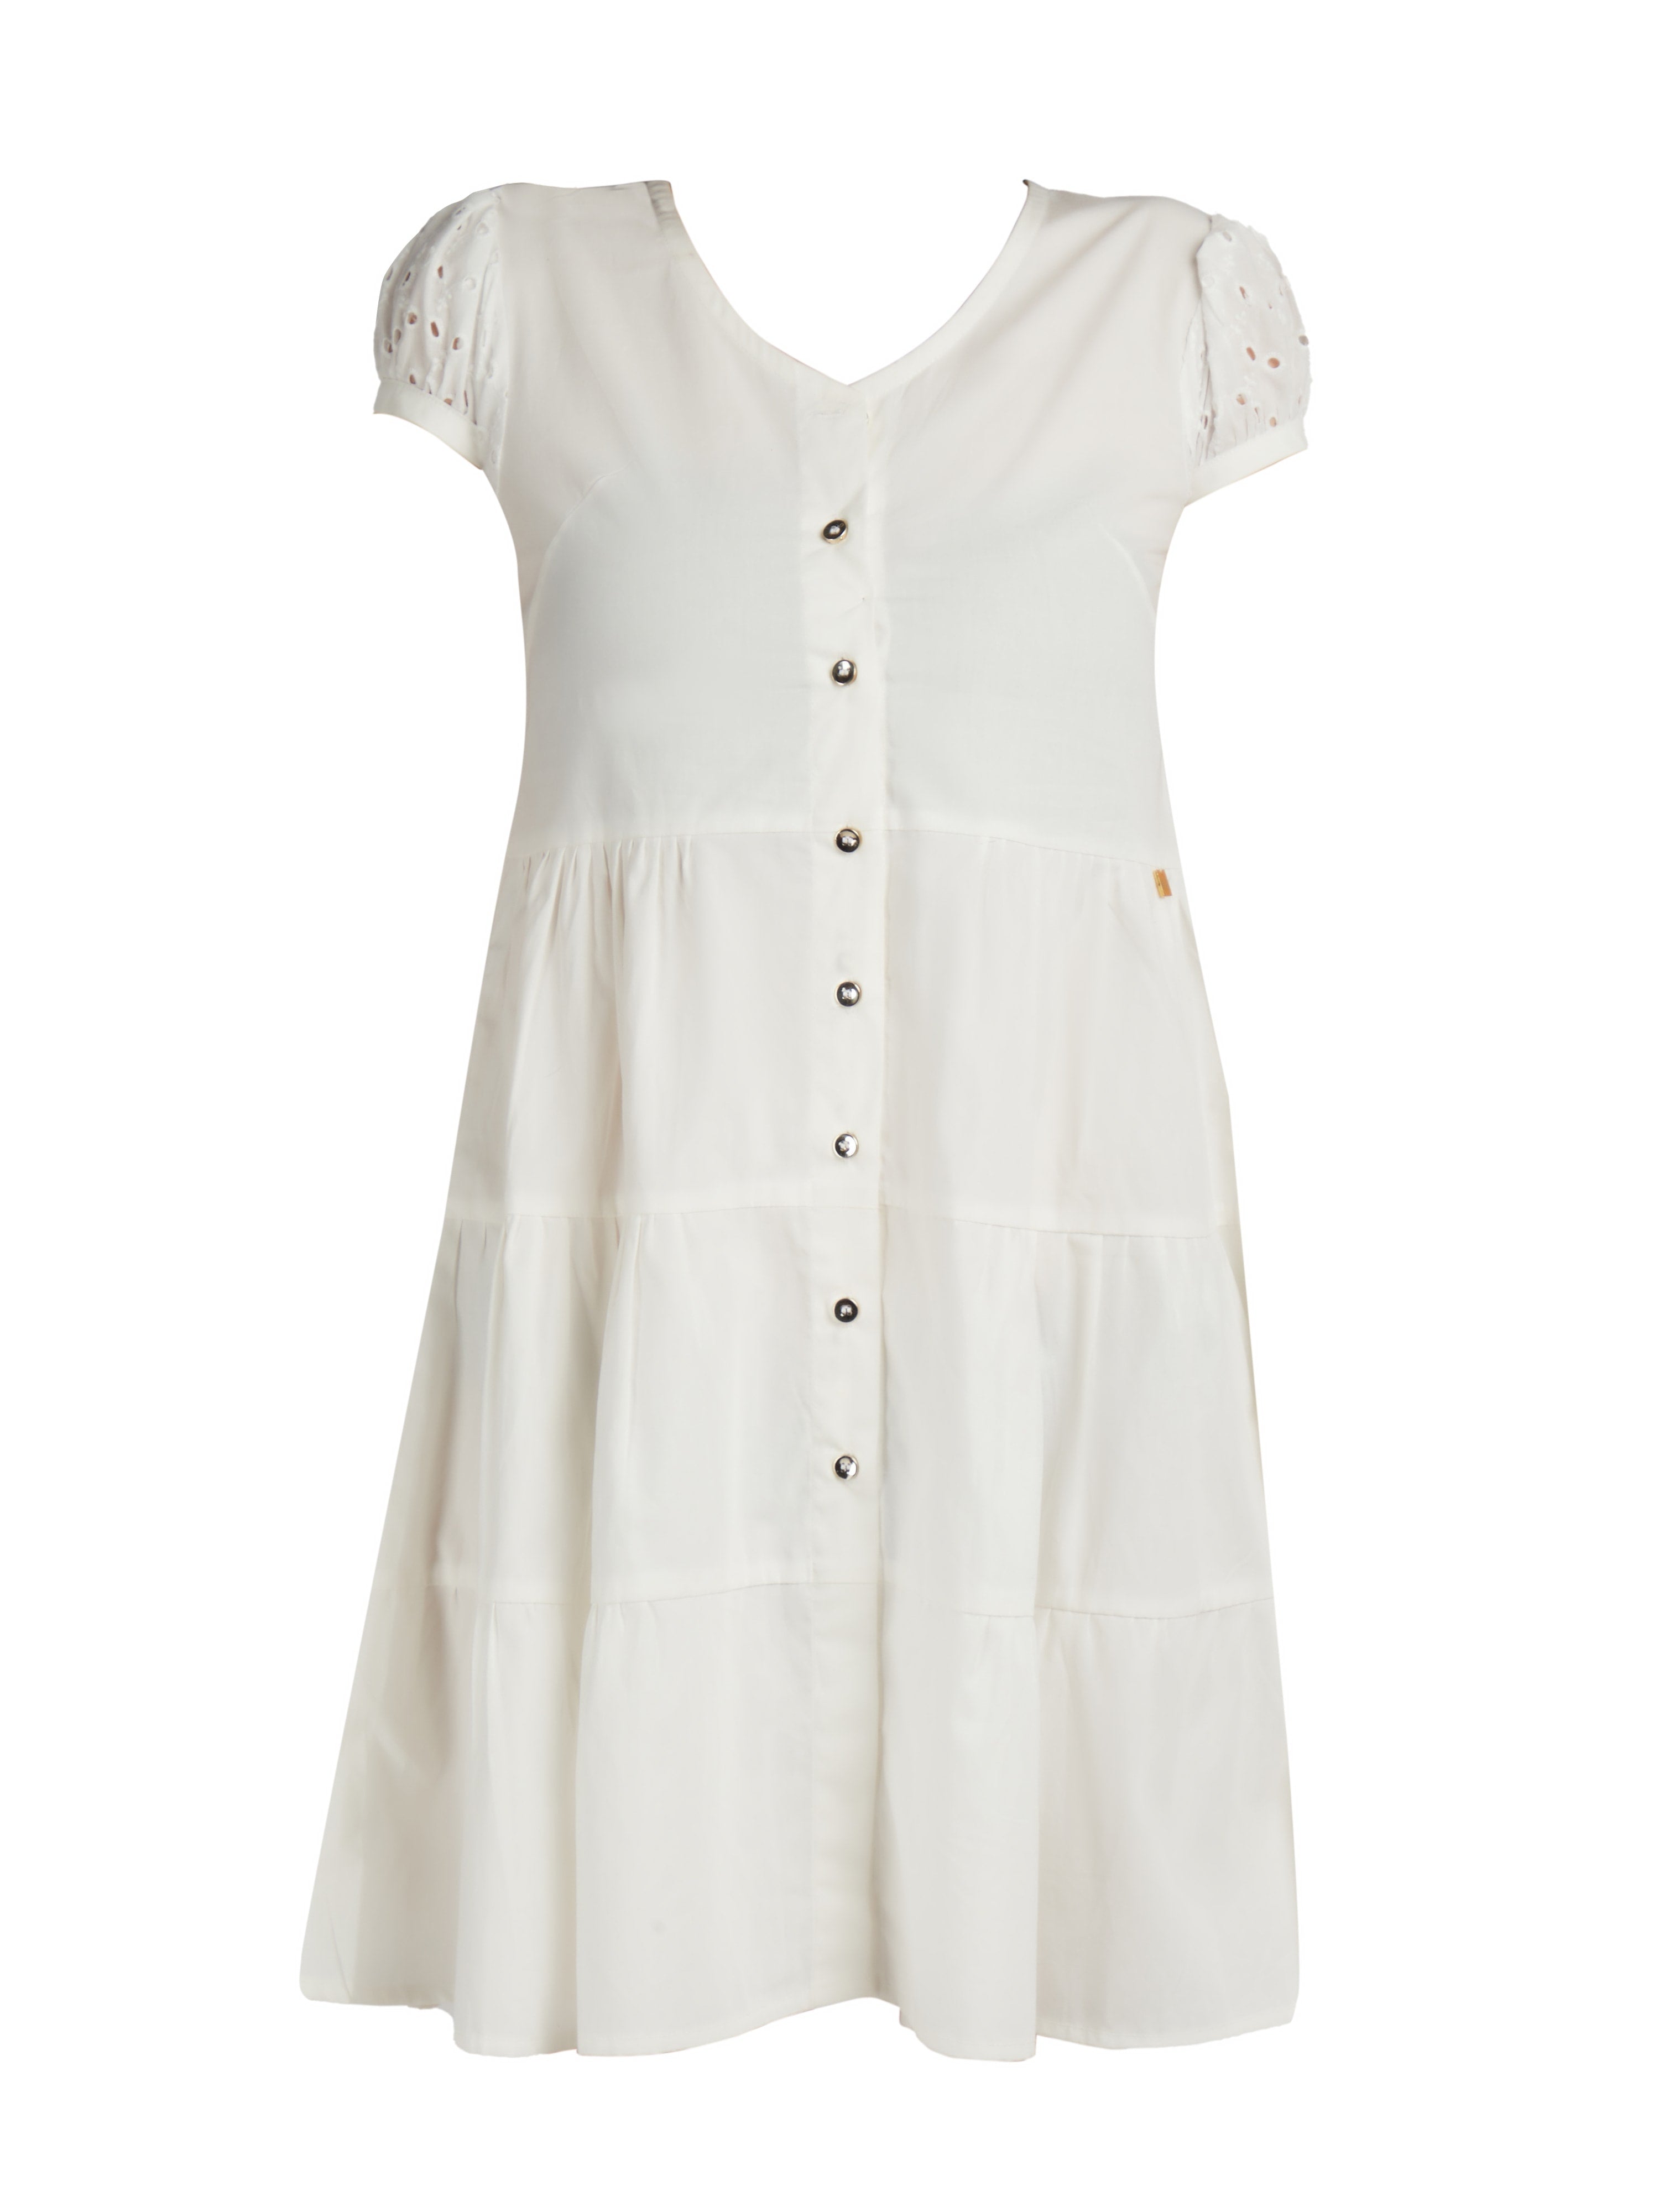 FRONT BUTTON DRESS WITH CAP SLEEVE